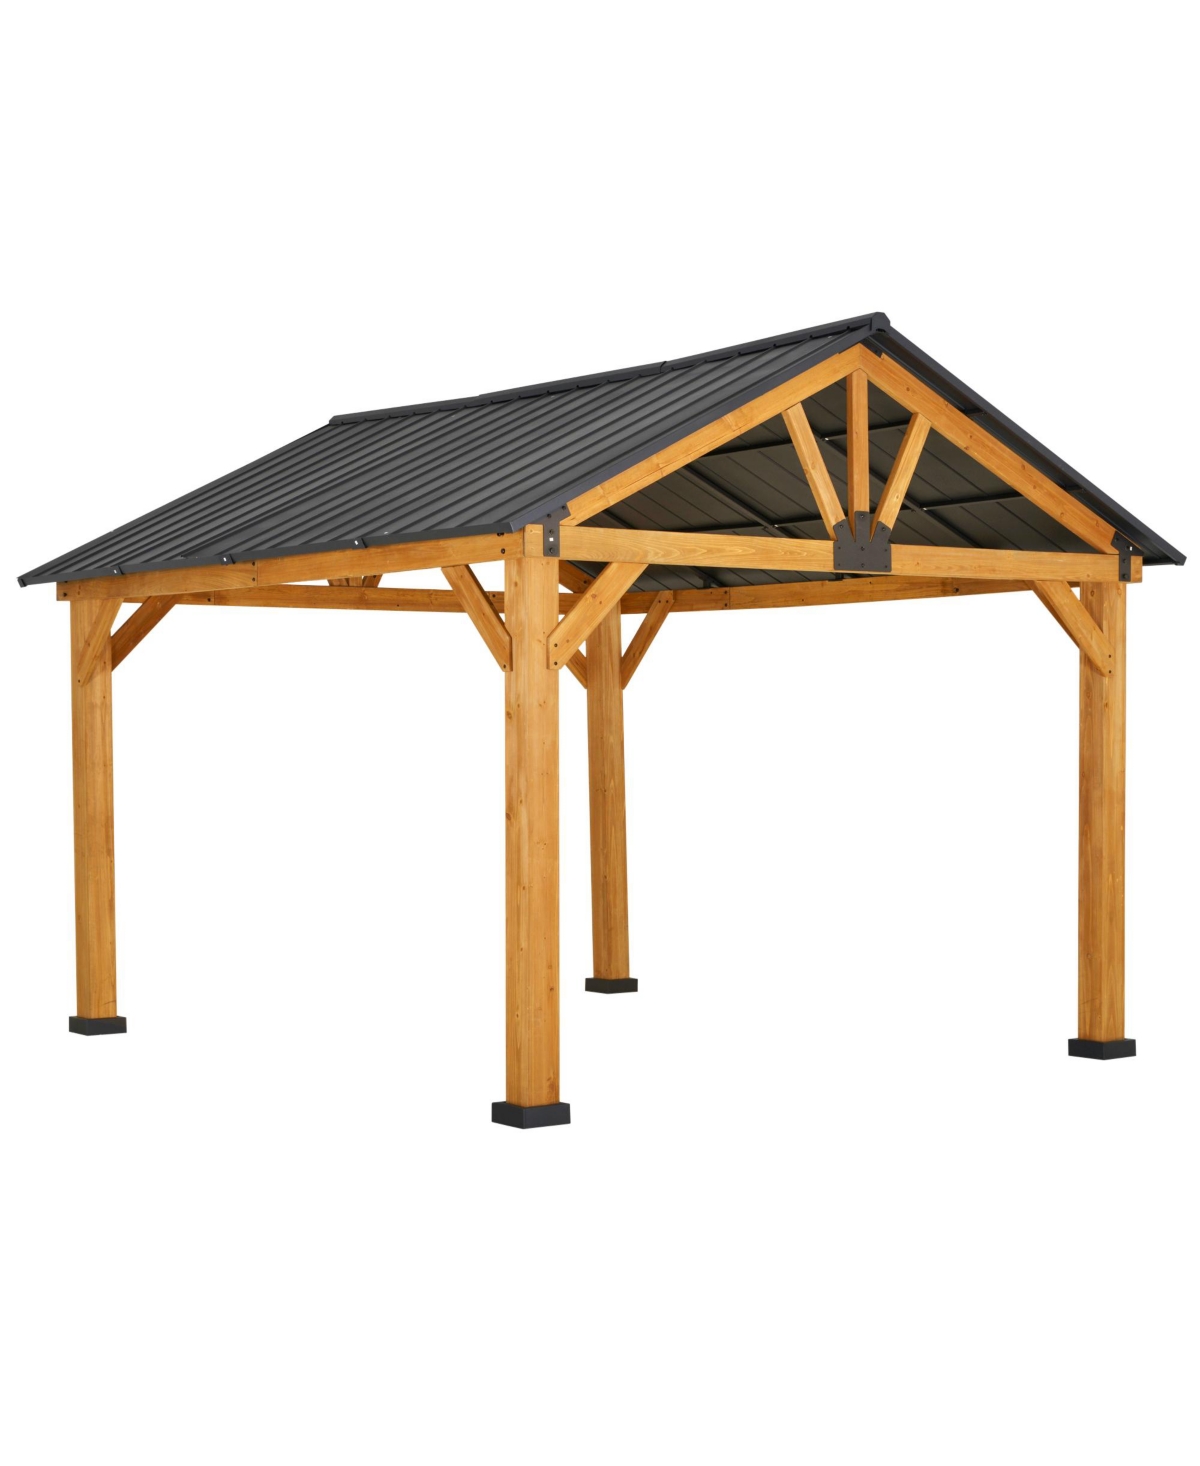 11x13 Hardtop Gazebo with Wooden Frame, Permanent Metal Roof Gazebo Canopy with Ceiling Hook for Garden, Patio, Backyard - Natural